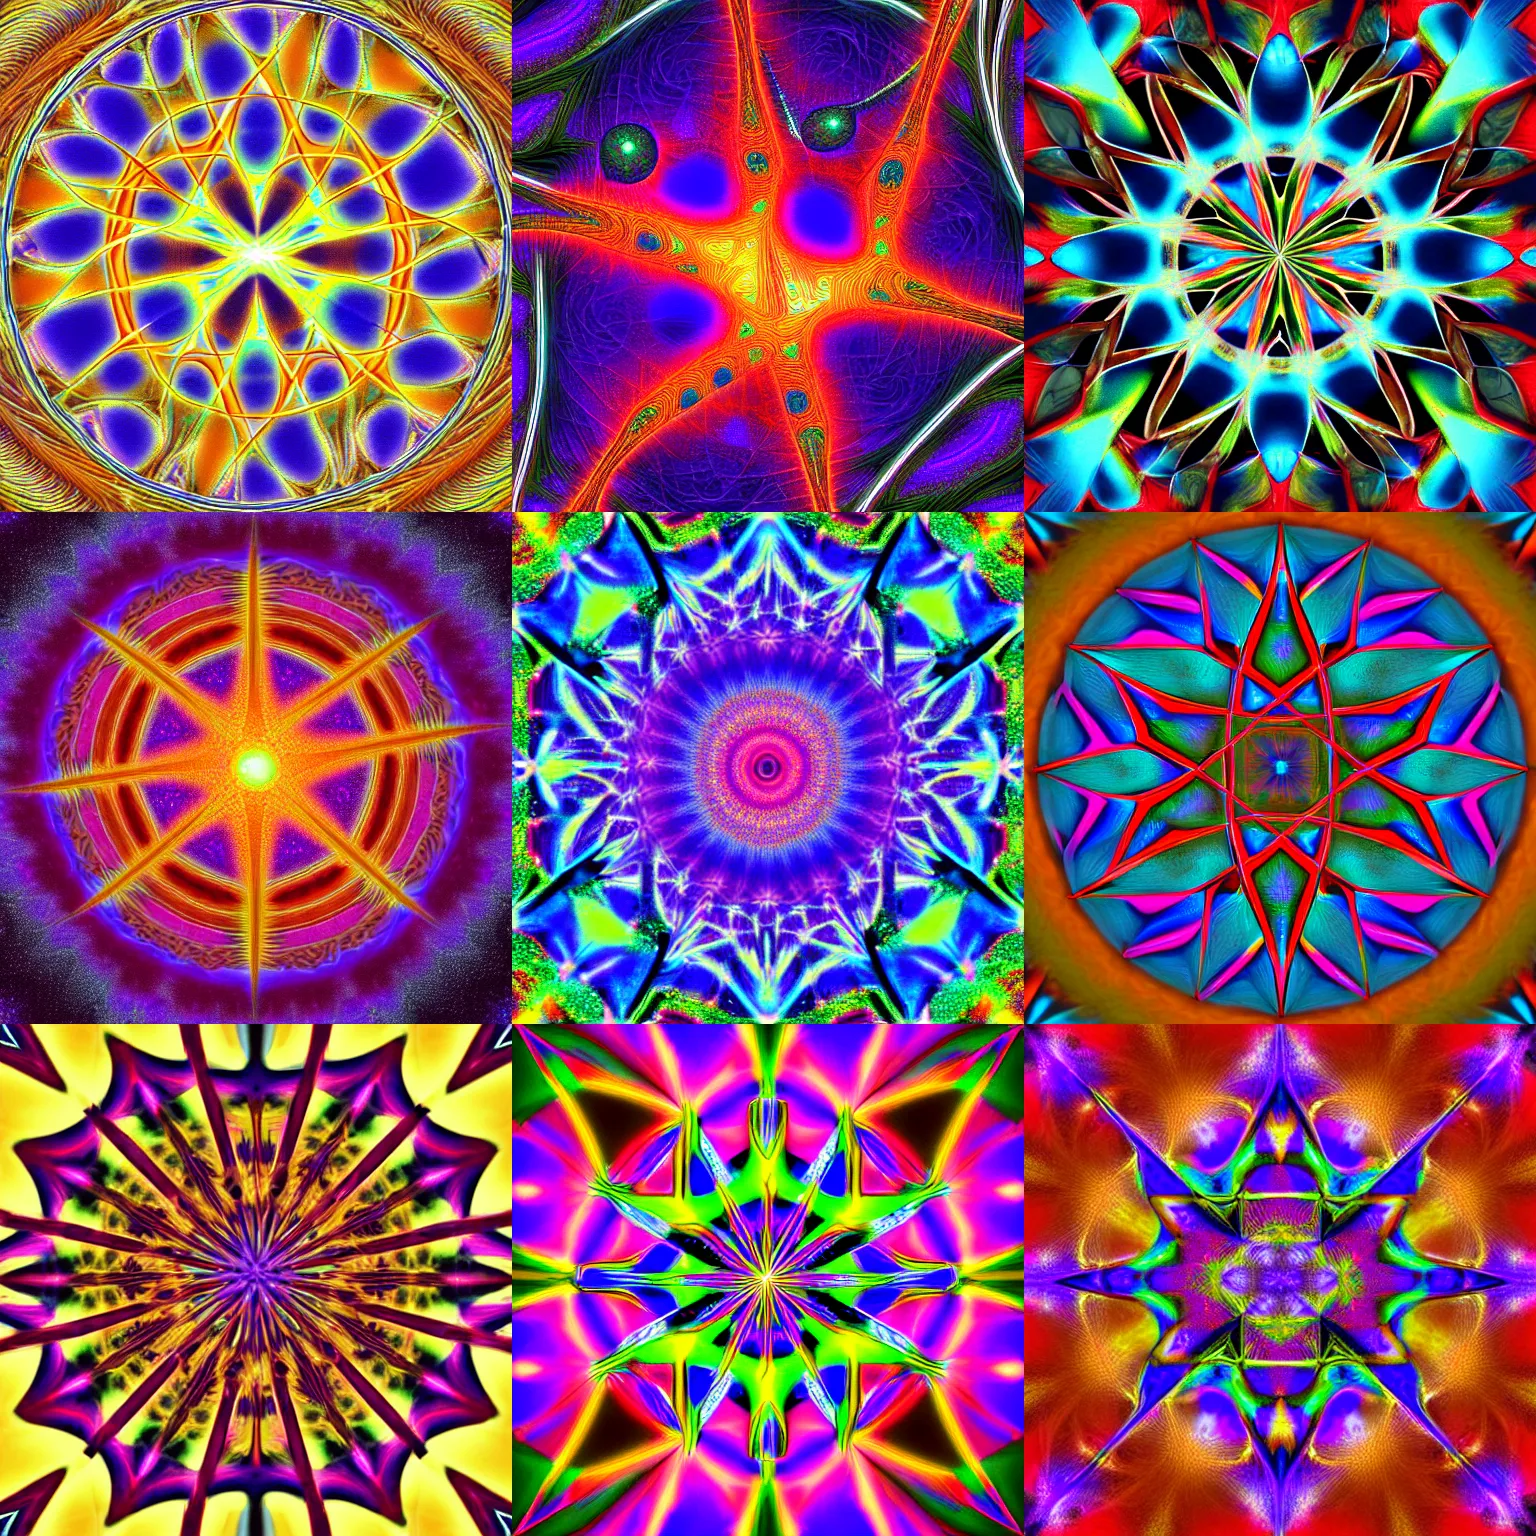 Prompt: an abstract image of a star shaped object, a digital rendering by Herb Aach, tumblr, abstract illusionism, fractalism, psychedelic, intricate patterns